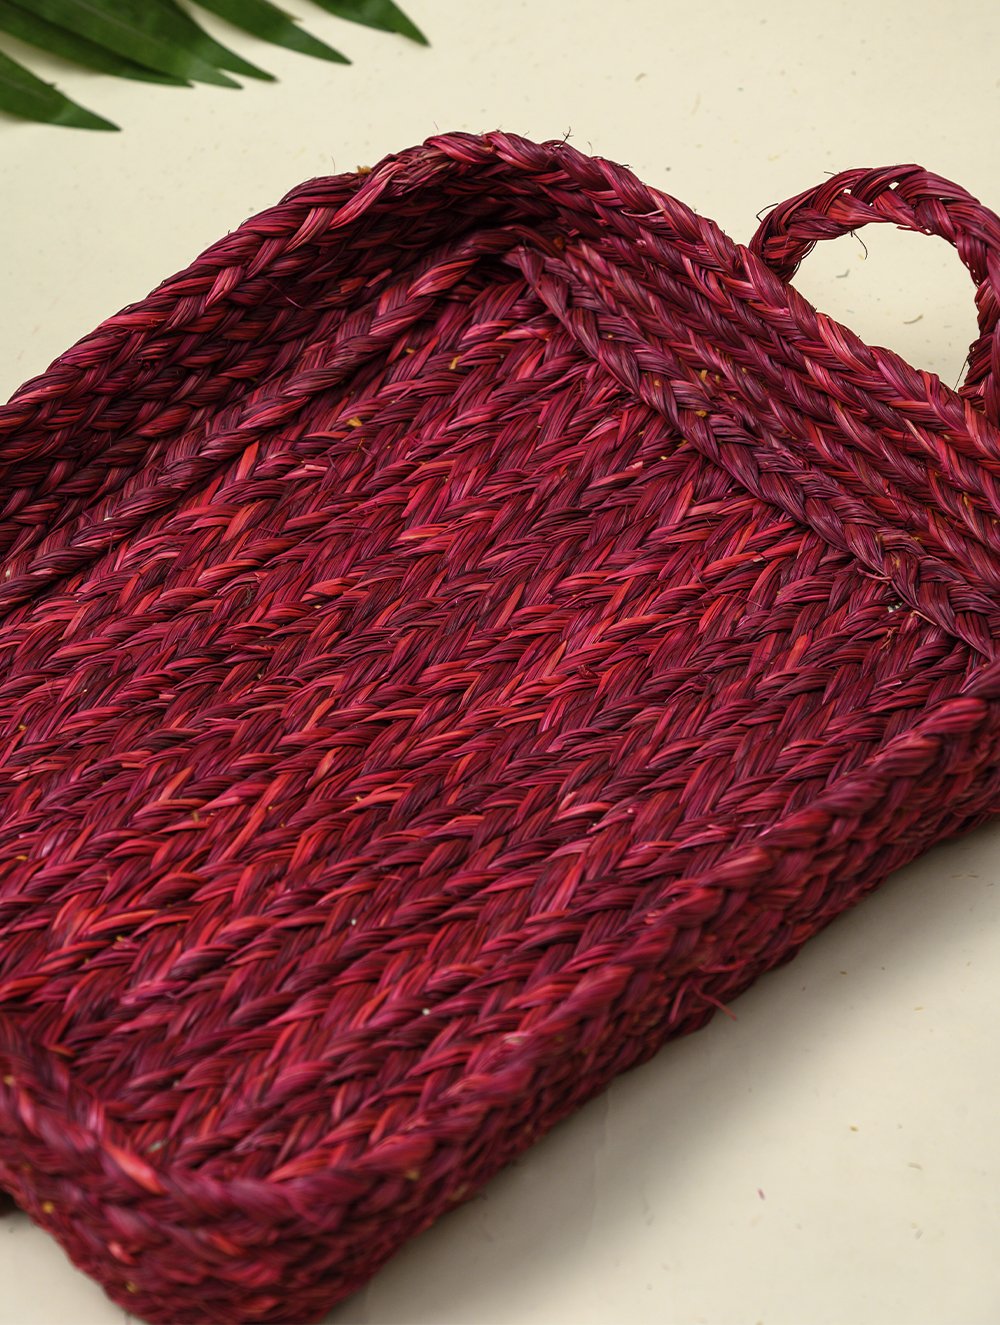 Load image into Gallery viewer, Handcrafted Sabai Grass Multi-Utility Tray - Warm Pink (Piece)